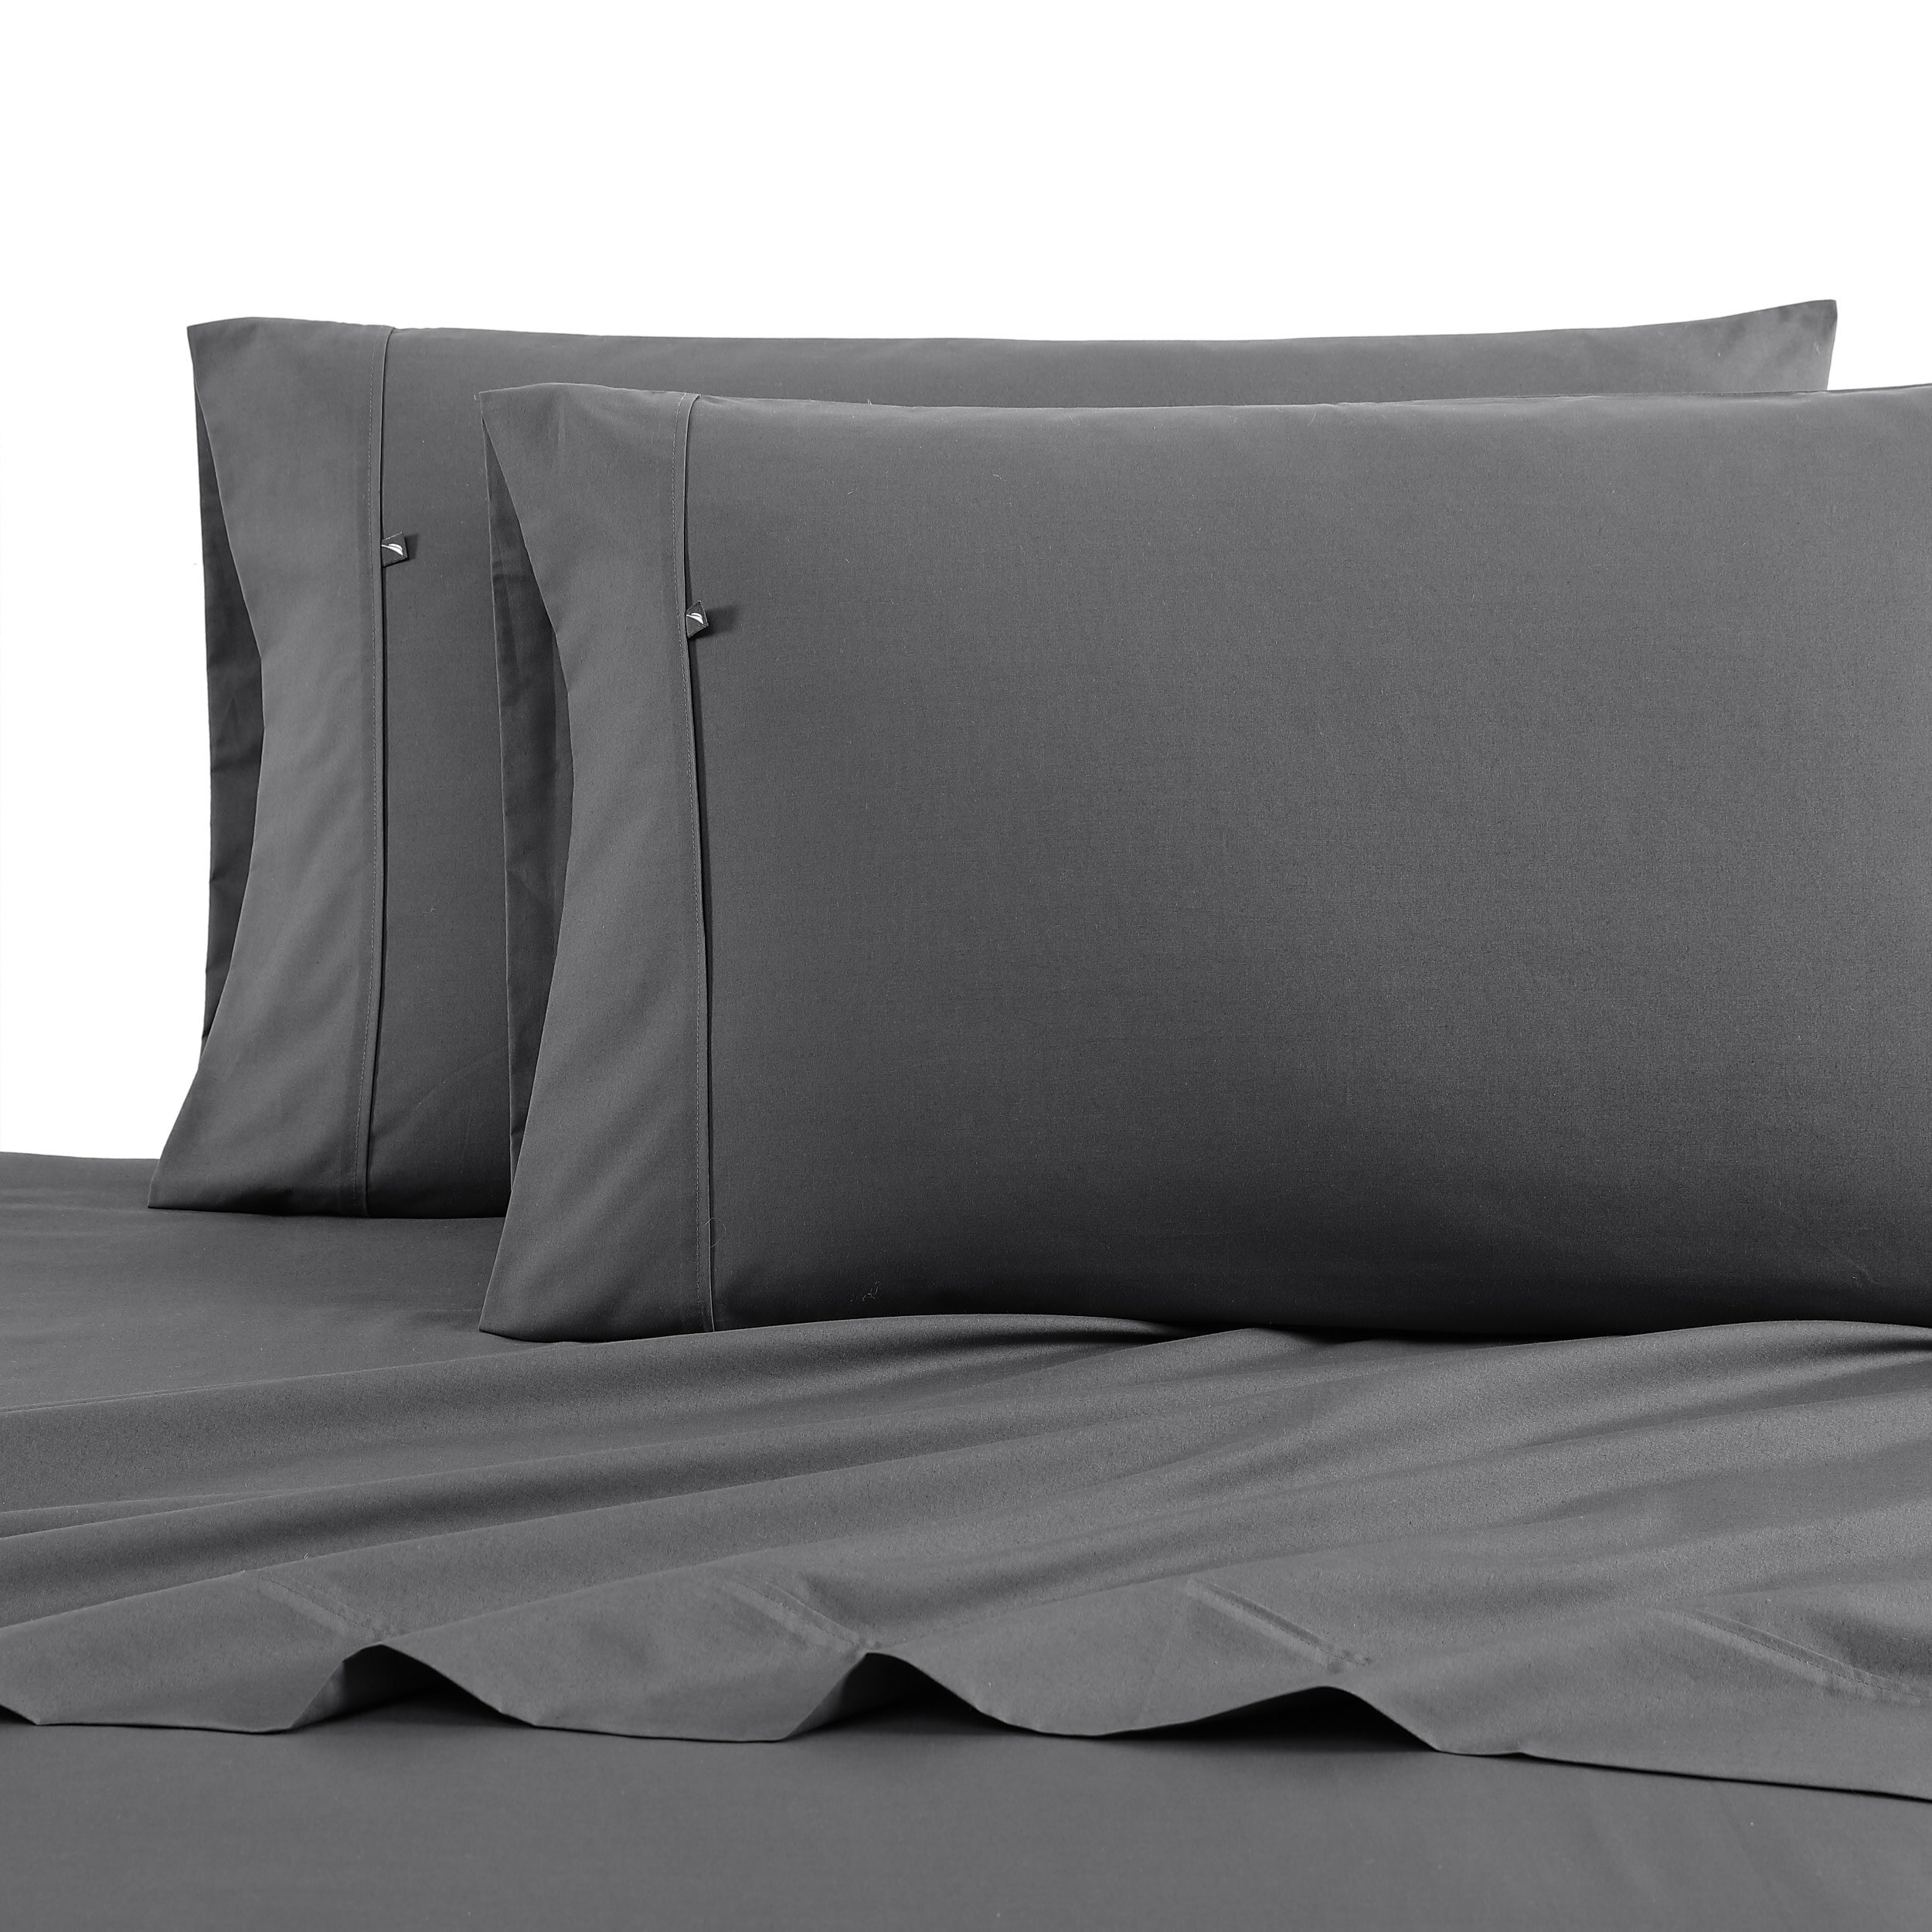 100% Cotton Bed Sheet Set Nautica Crisp & Cool Percale Collection Lightweight & Moisture-Wicking Bedding Audley Twin 